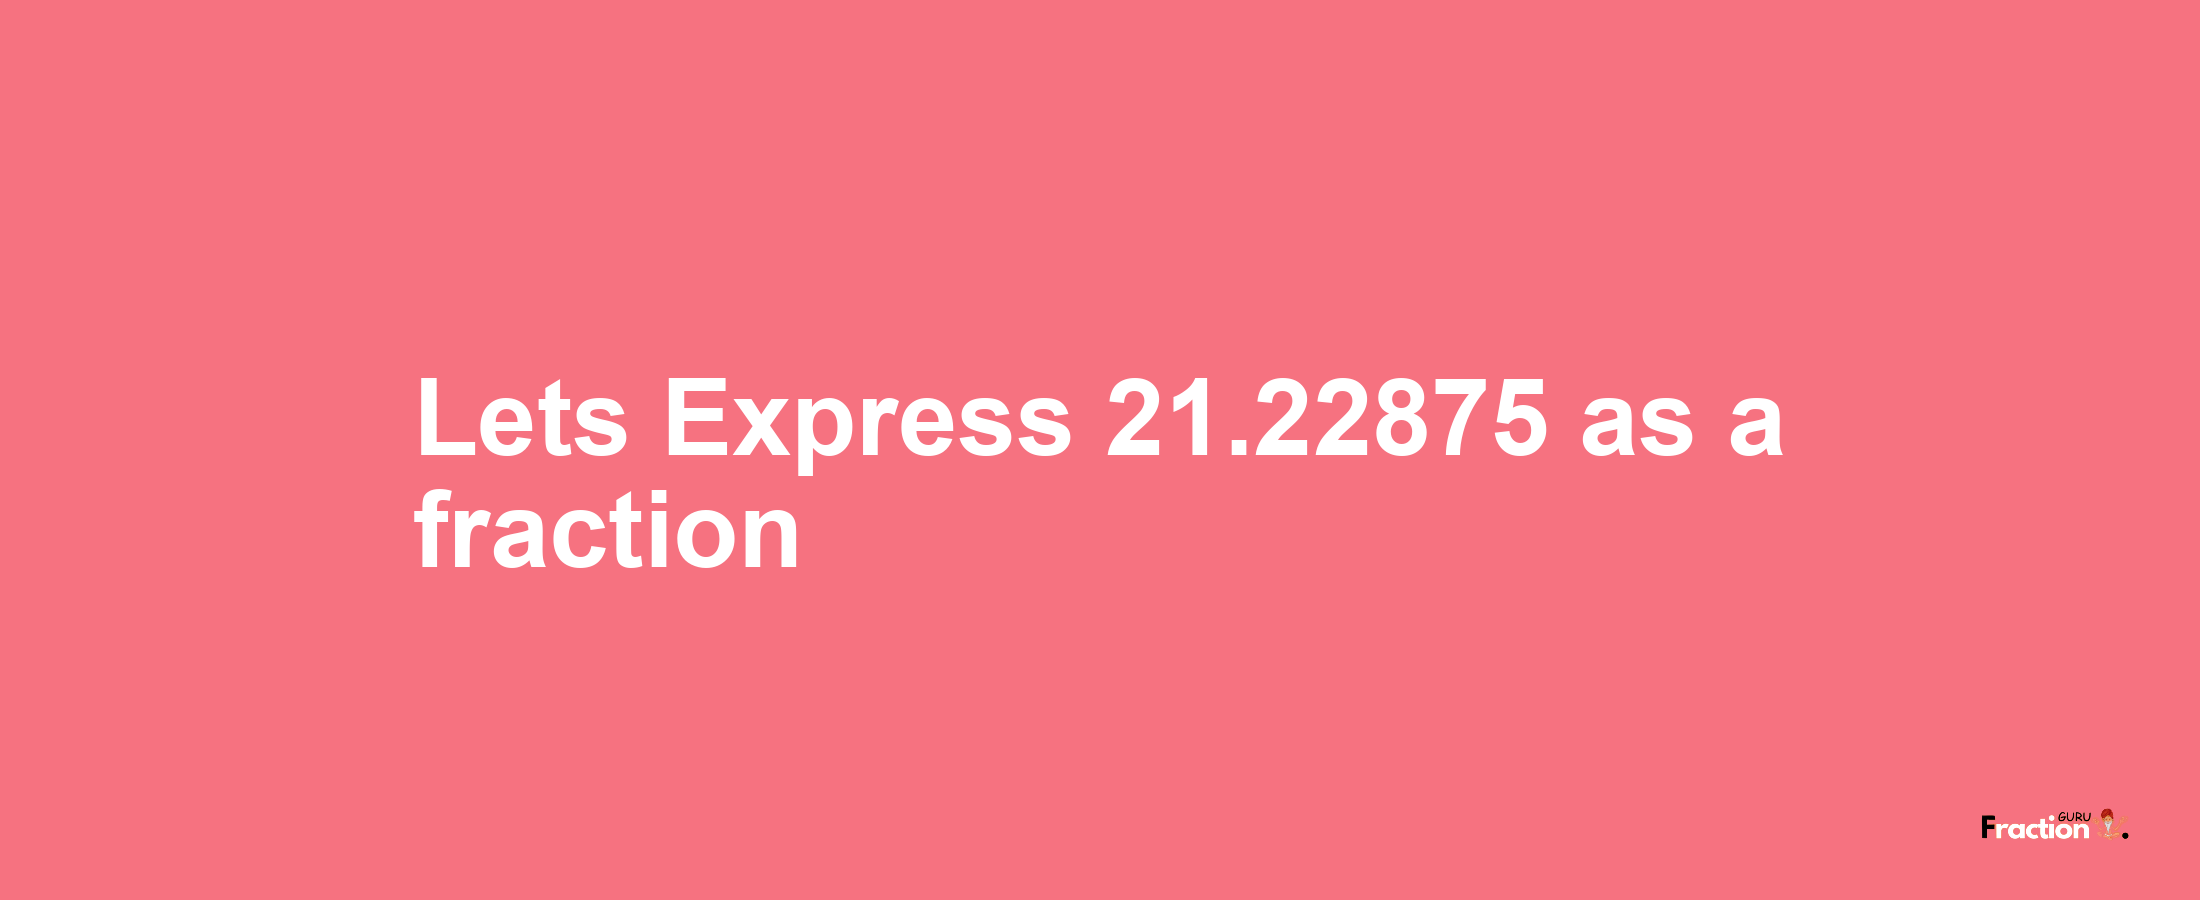 Lets Express 21.22875 as afraction